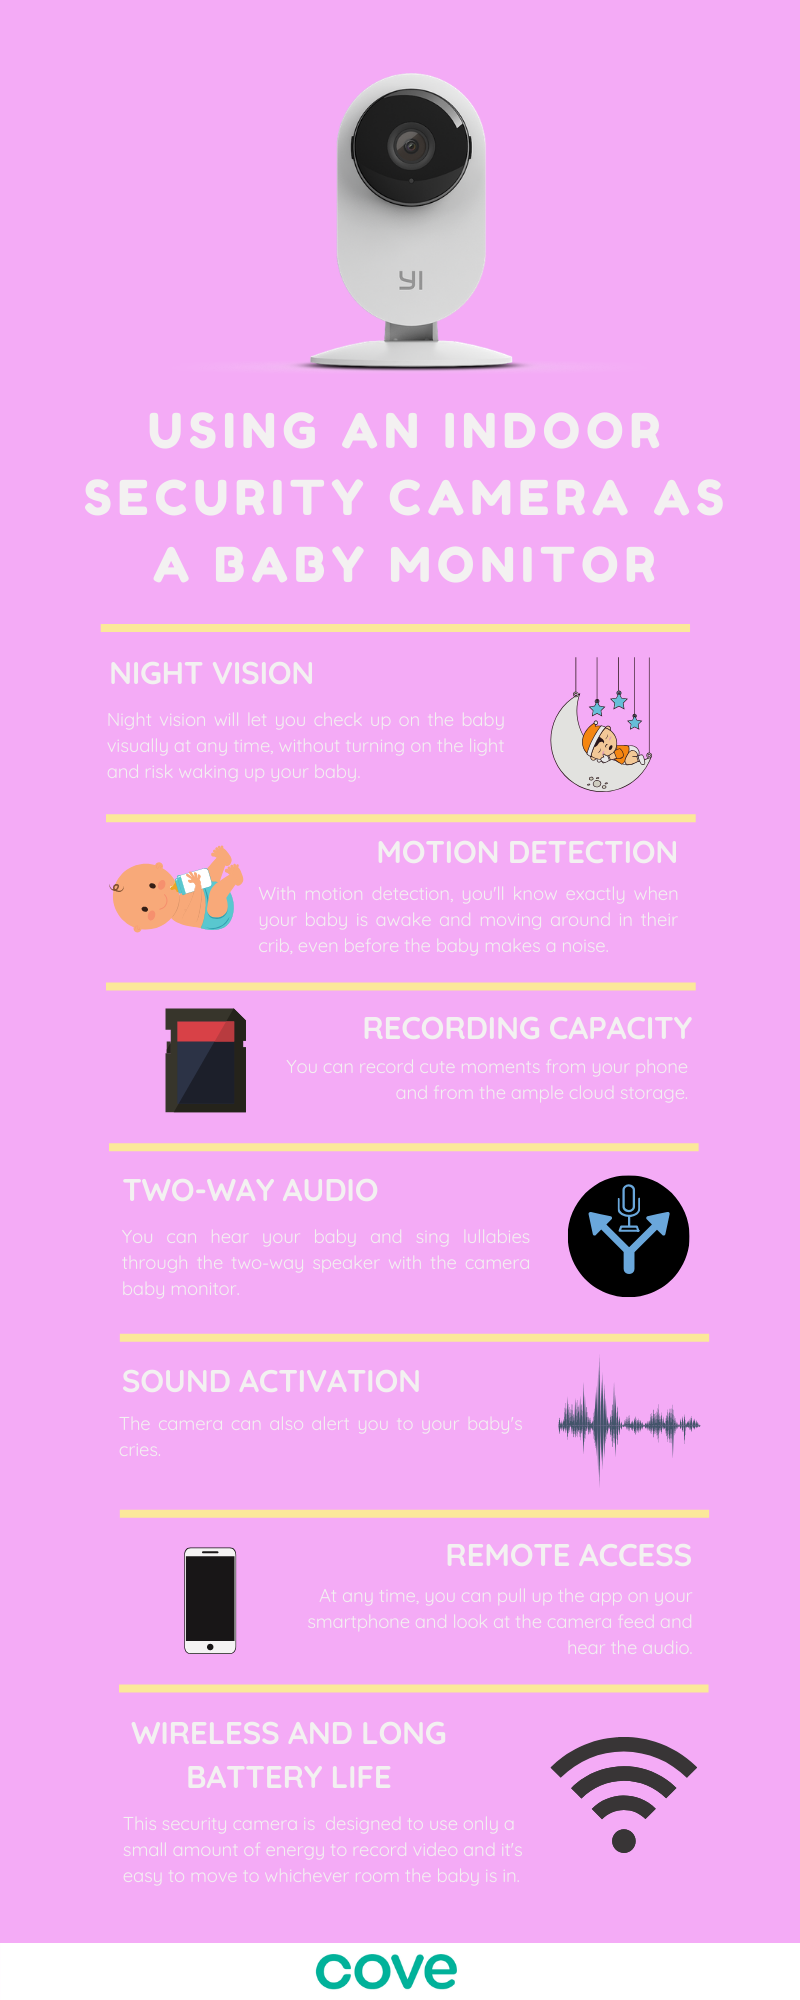 Infographic of how to Use an Indoor Security Camera as a Baby Camera and Monitor